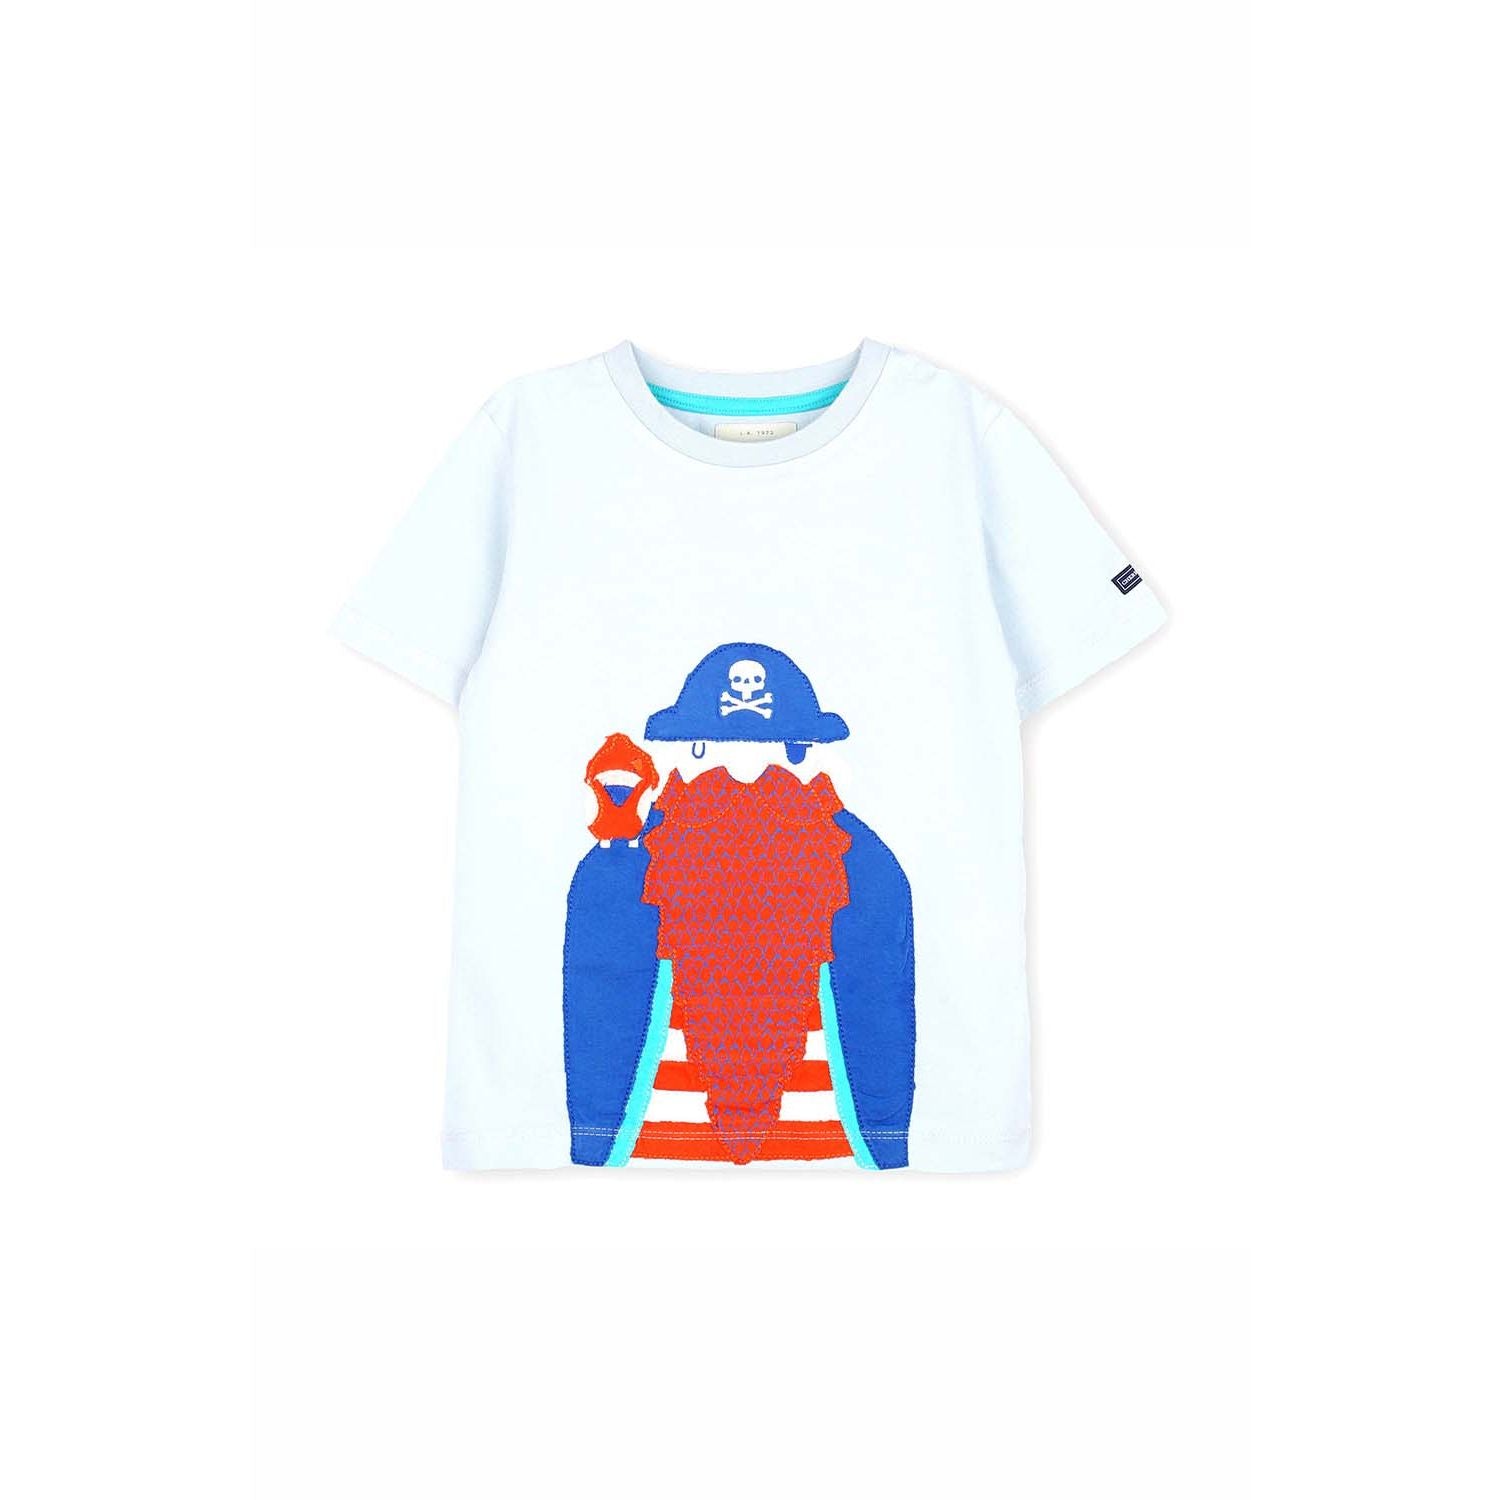 Bio Washed Cotton Blue Red With Orange T Shirt for Boys